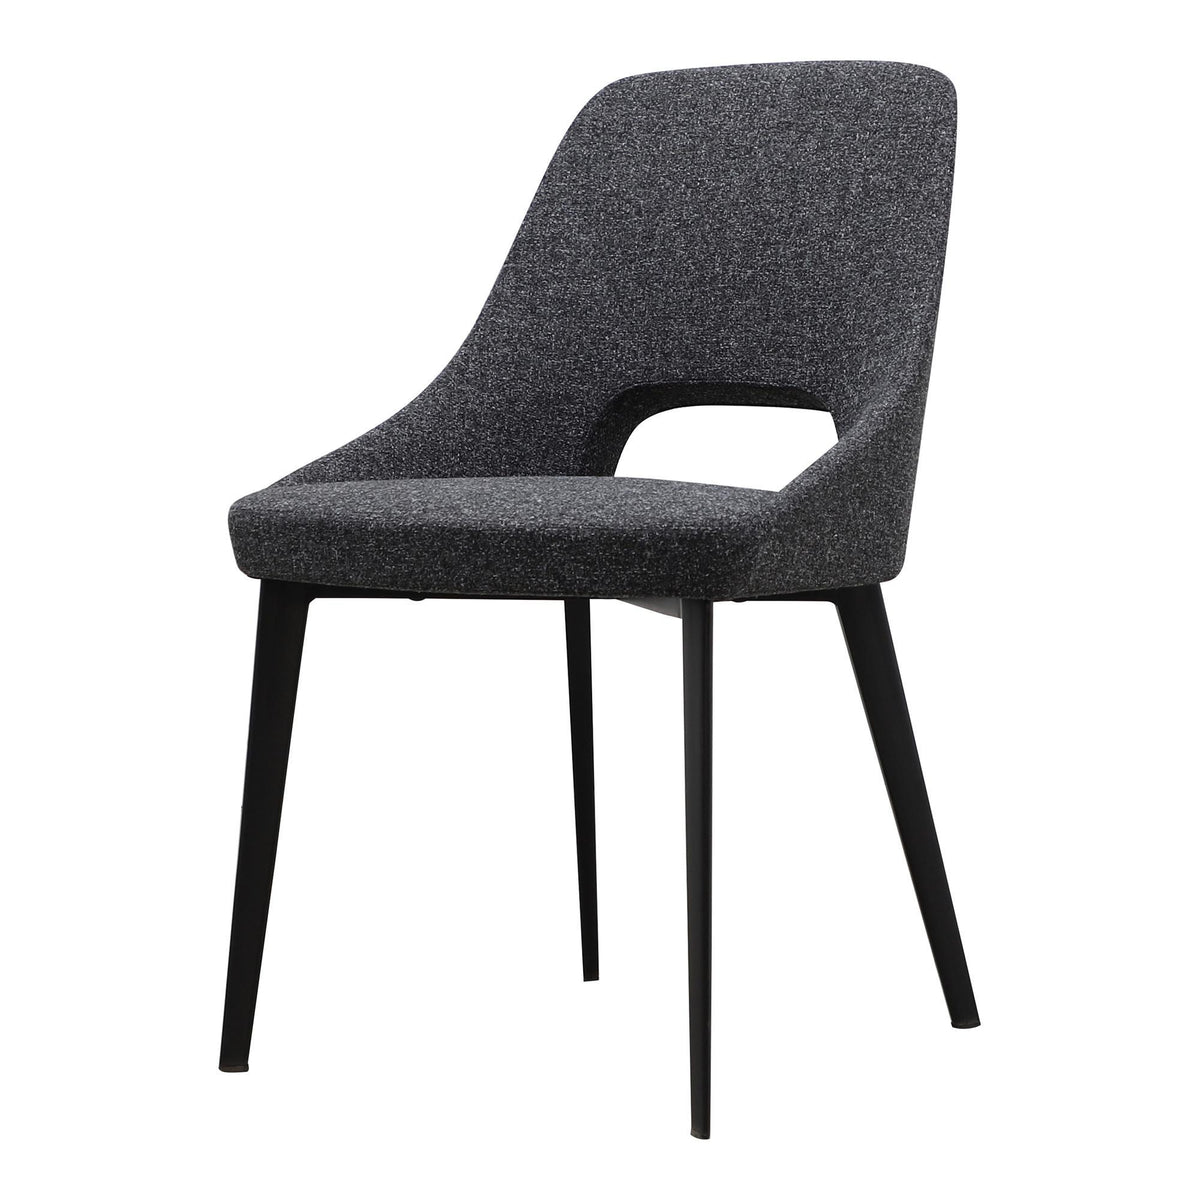 Moe's Home Collection Tizz Dining Chair Dark Grey - EJ-1041-25